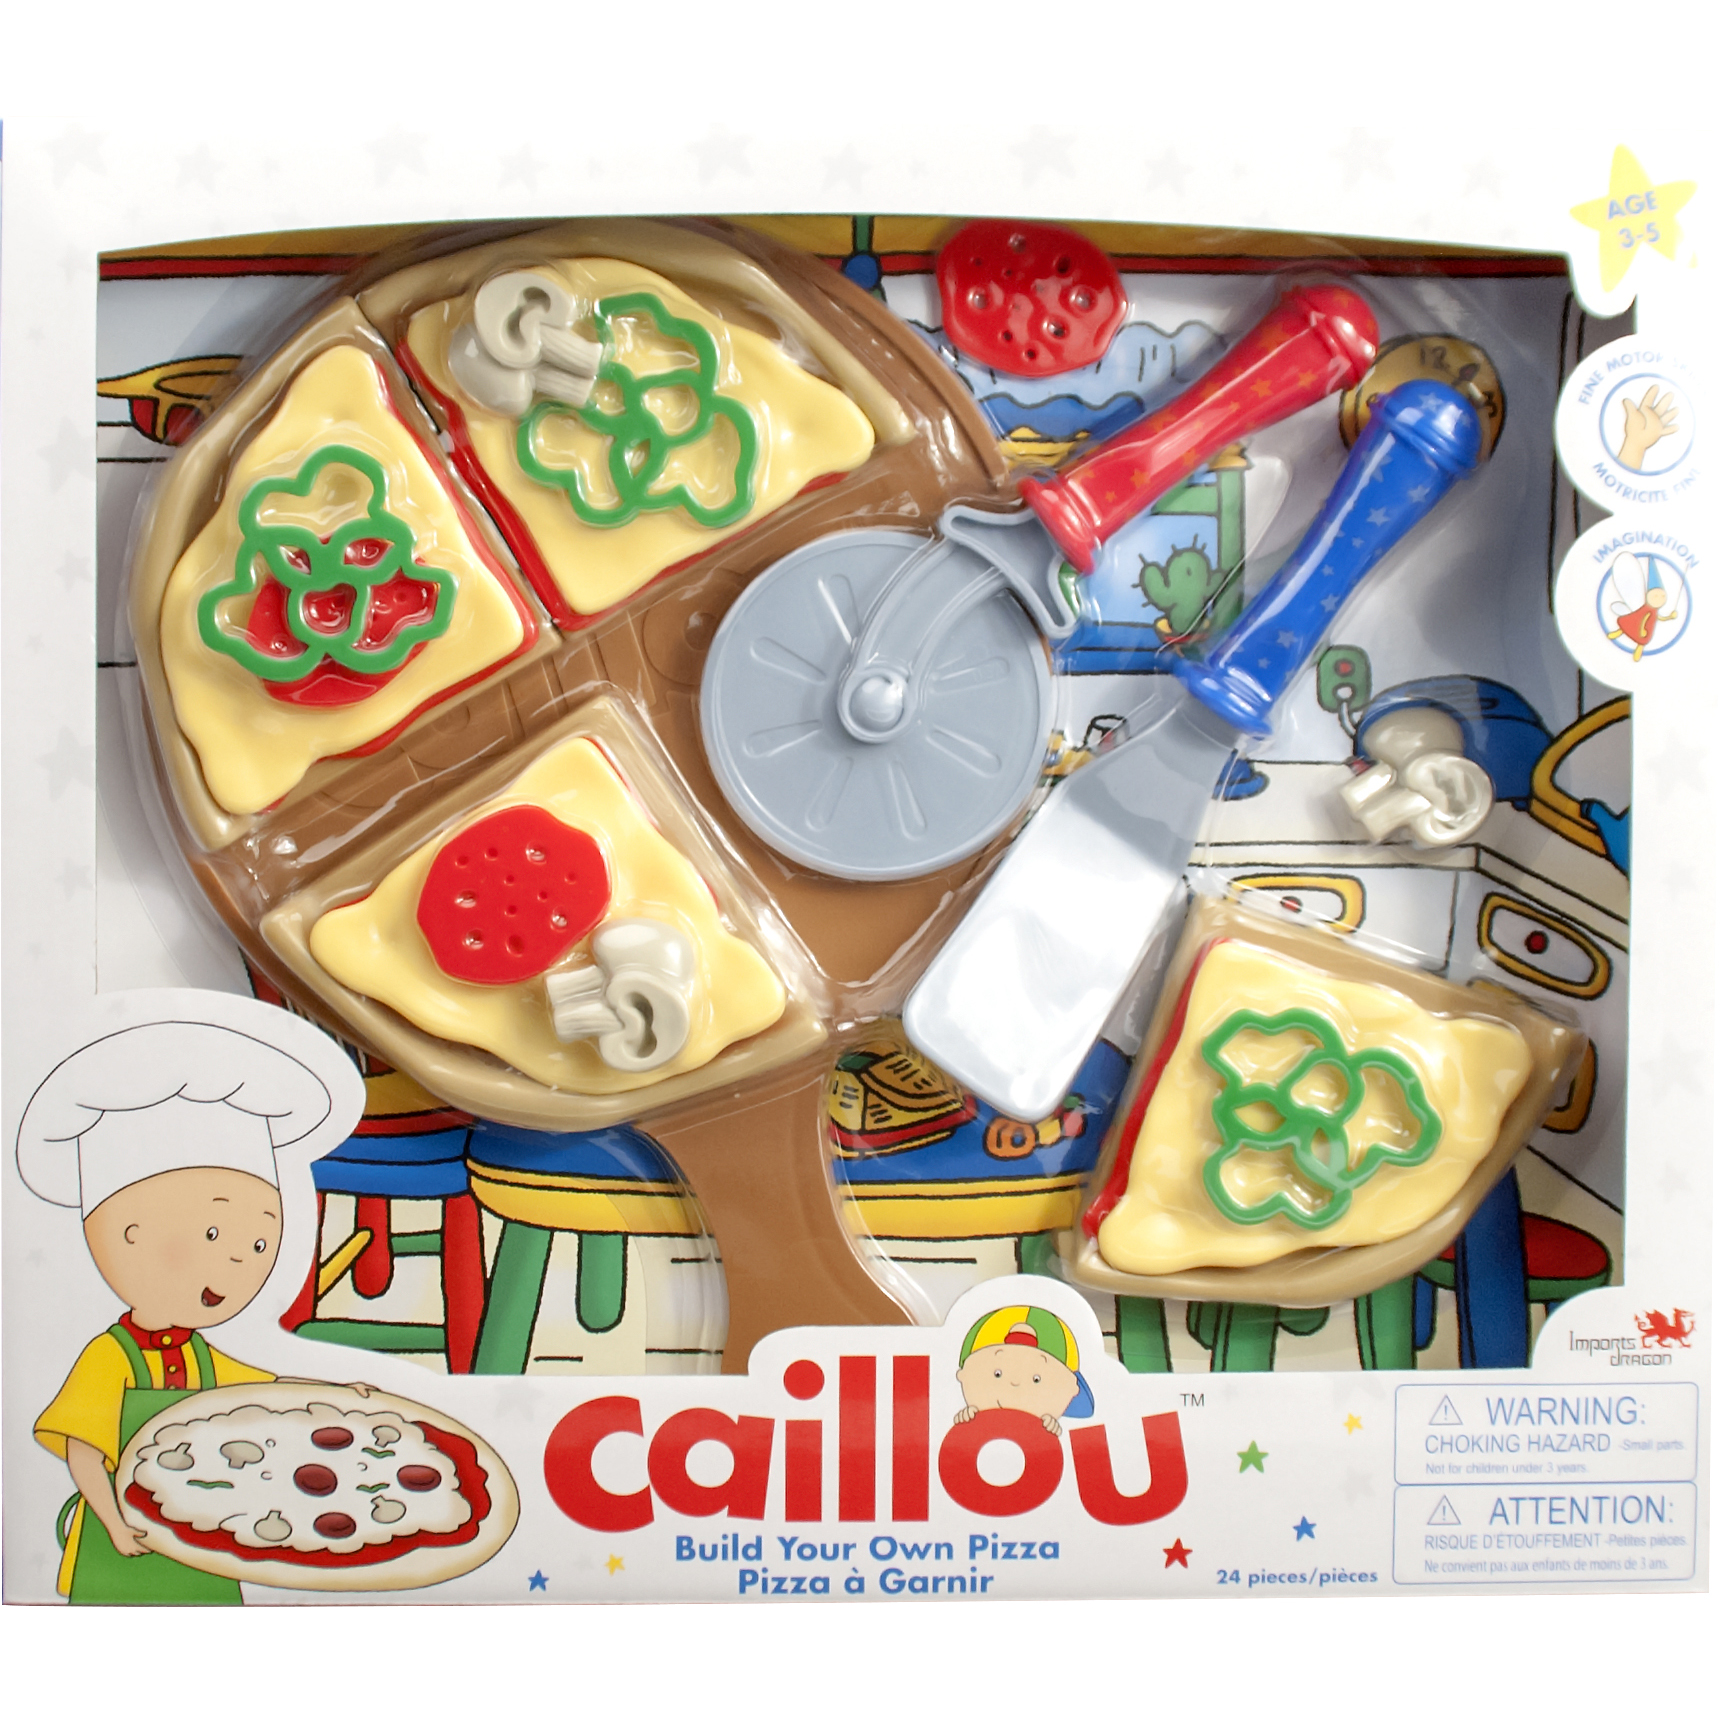 Caillou ID02860 Build Your Own Pizza Set   Toys & Games   Pretend Play